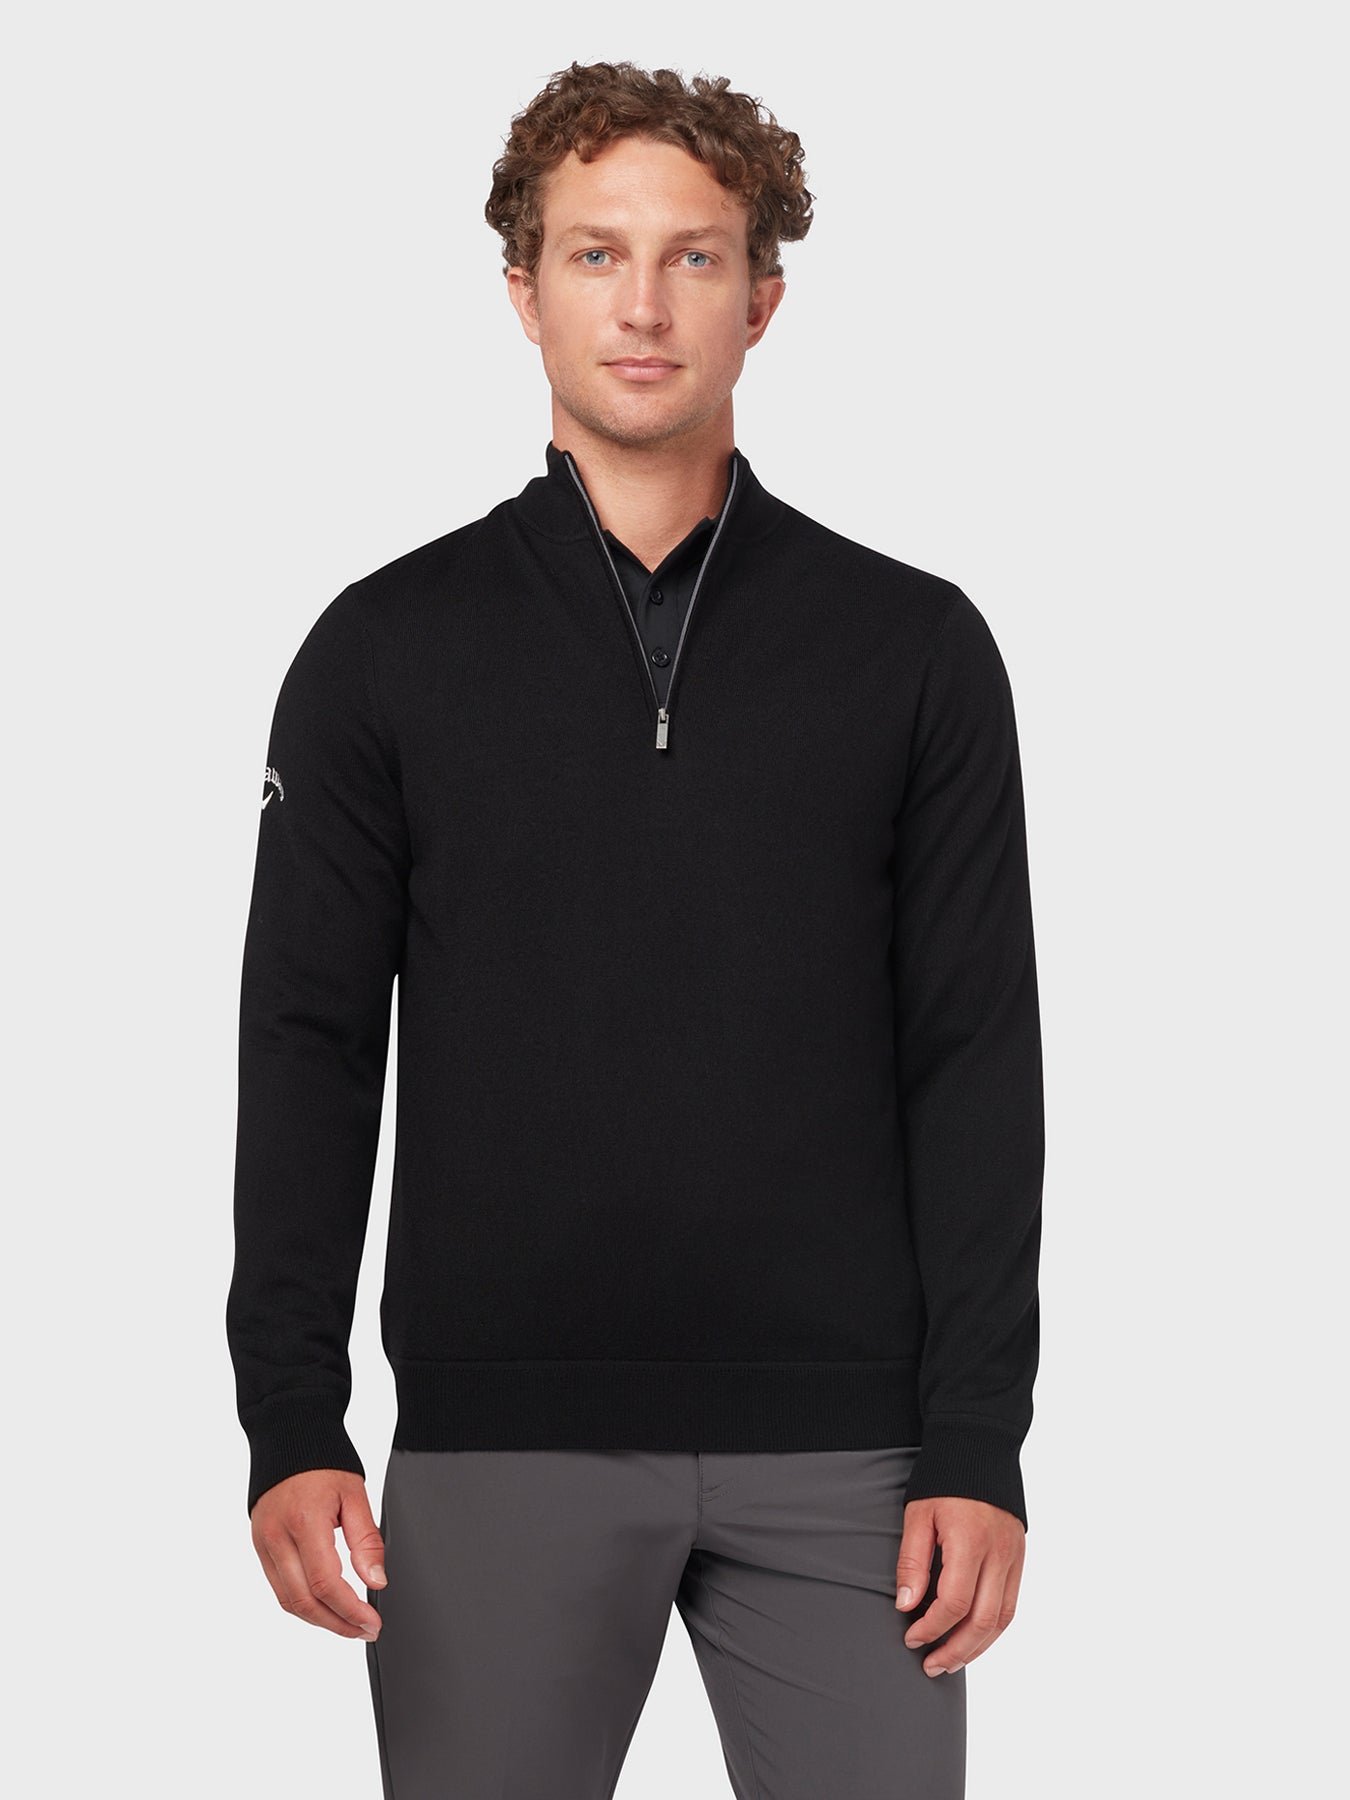 View Windstopper Quarter Zipped Sweater In Black Ink information